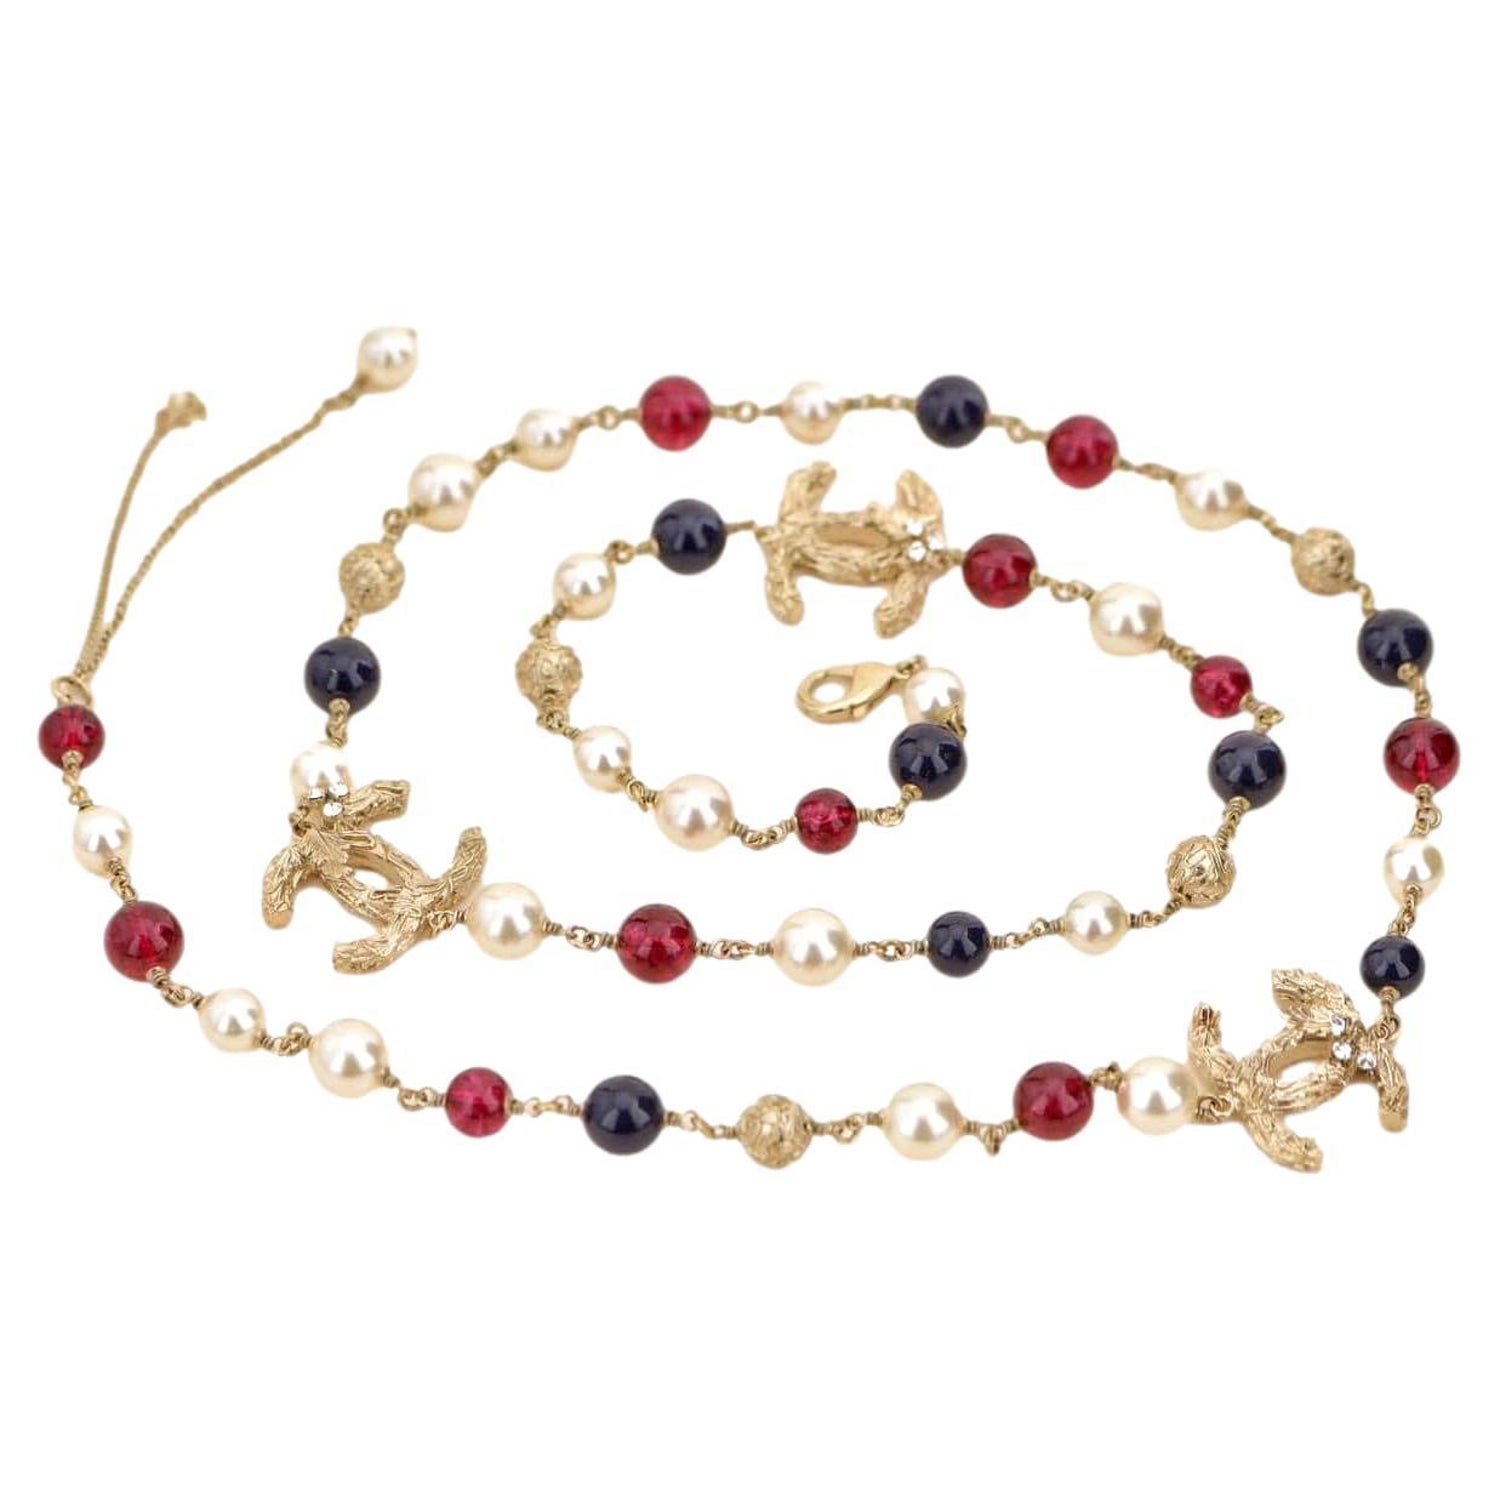 Chanel Choker/Necklace with Logo Clasp in Goldtone and Black Beads - Ruby  Lane